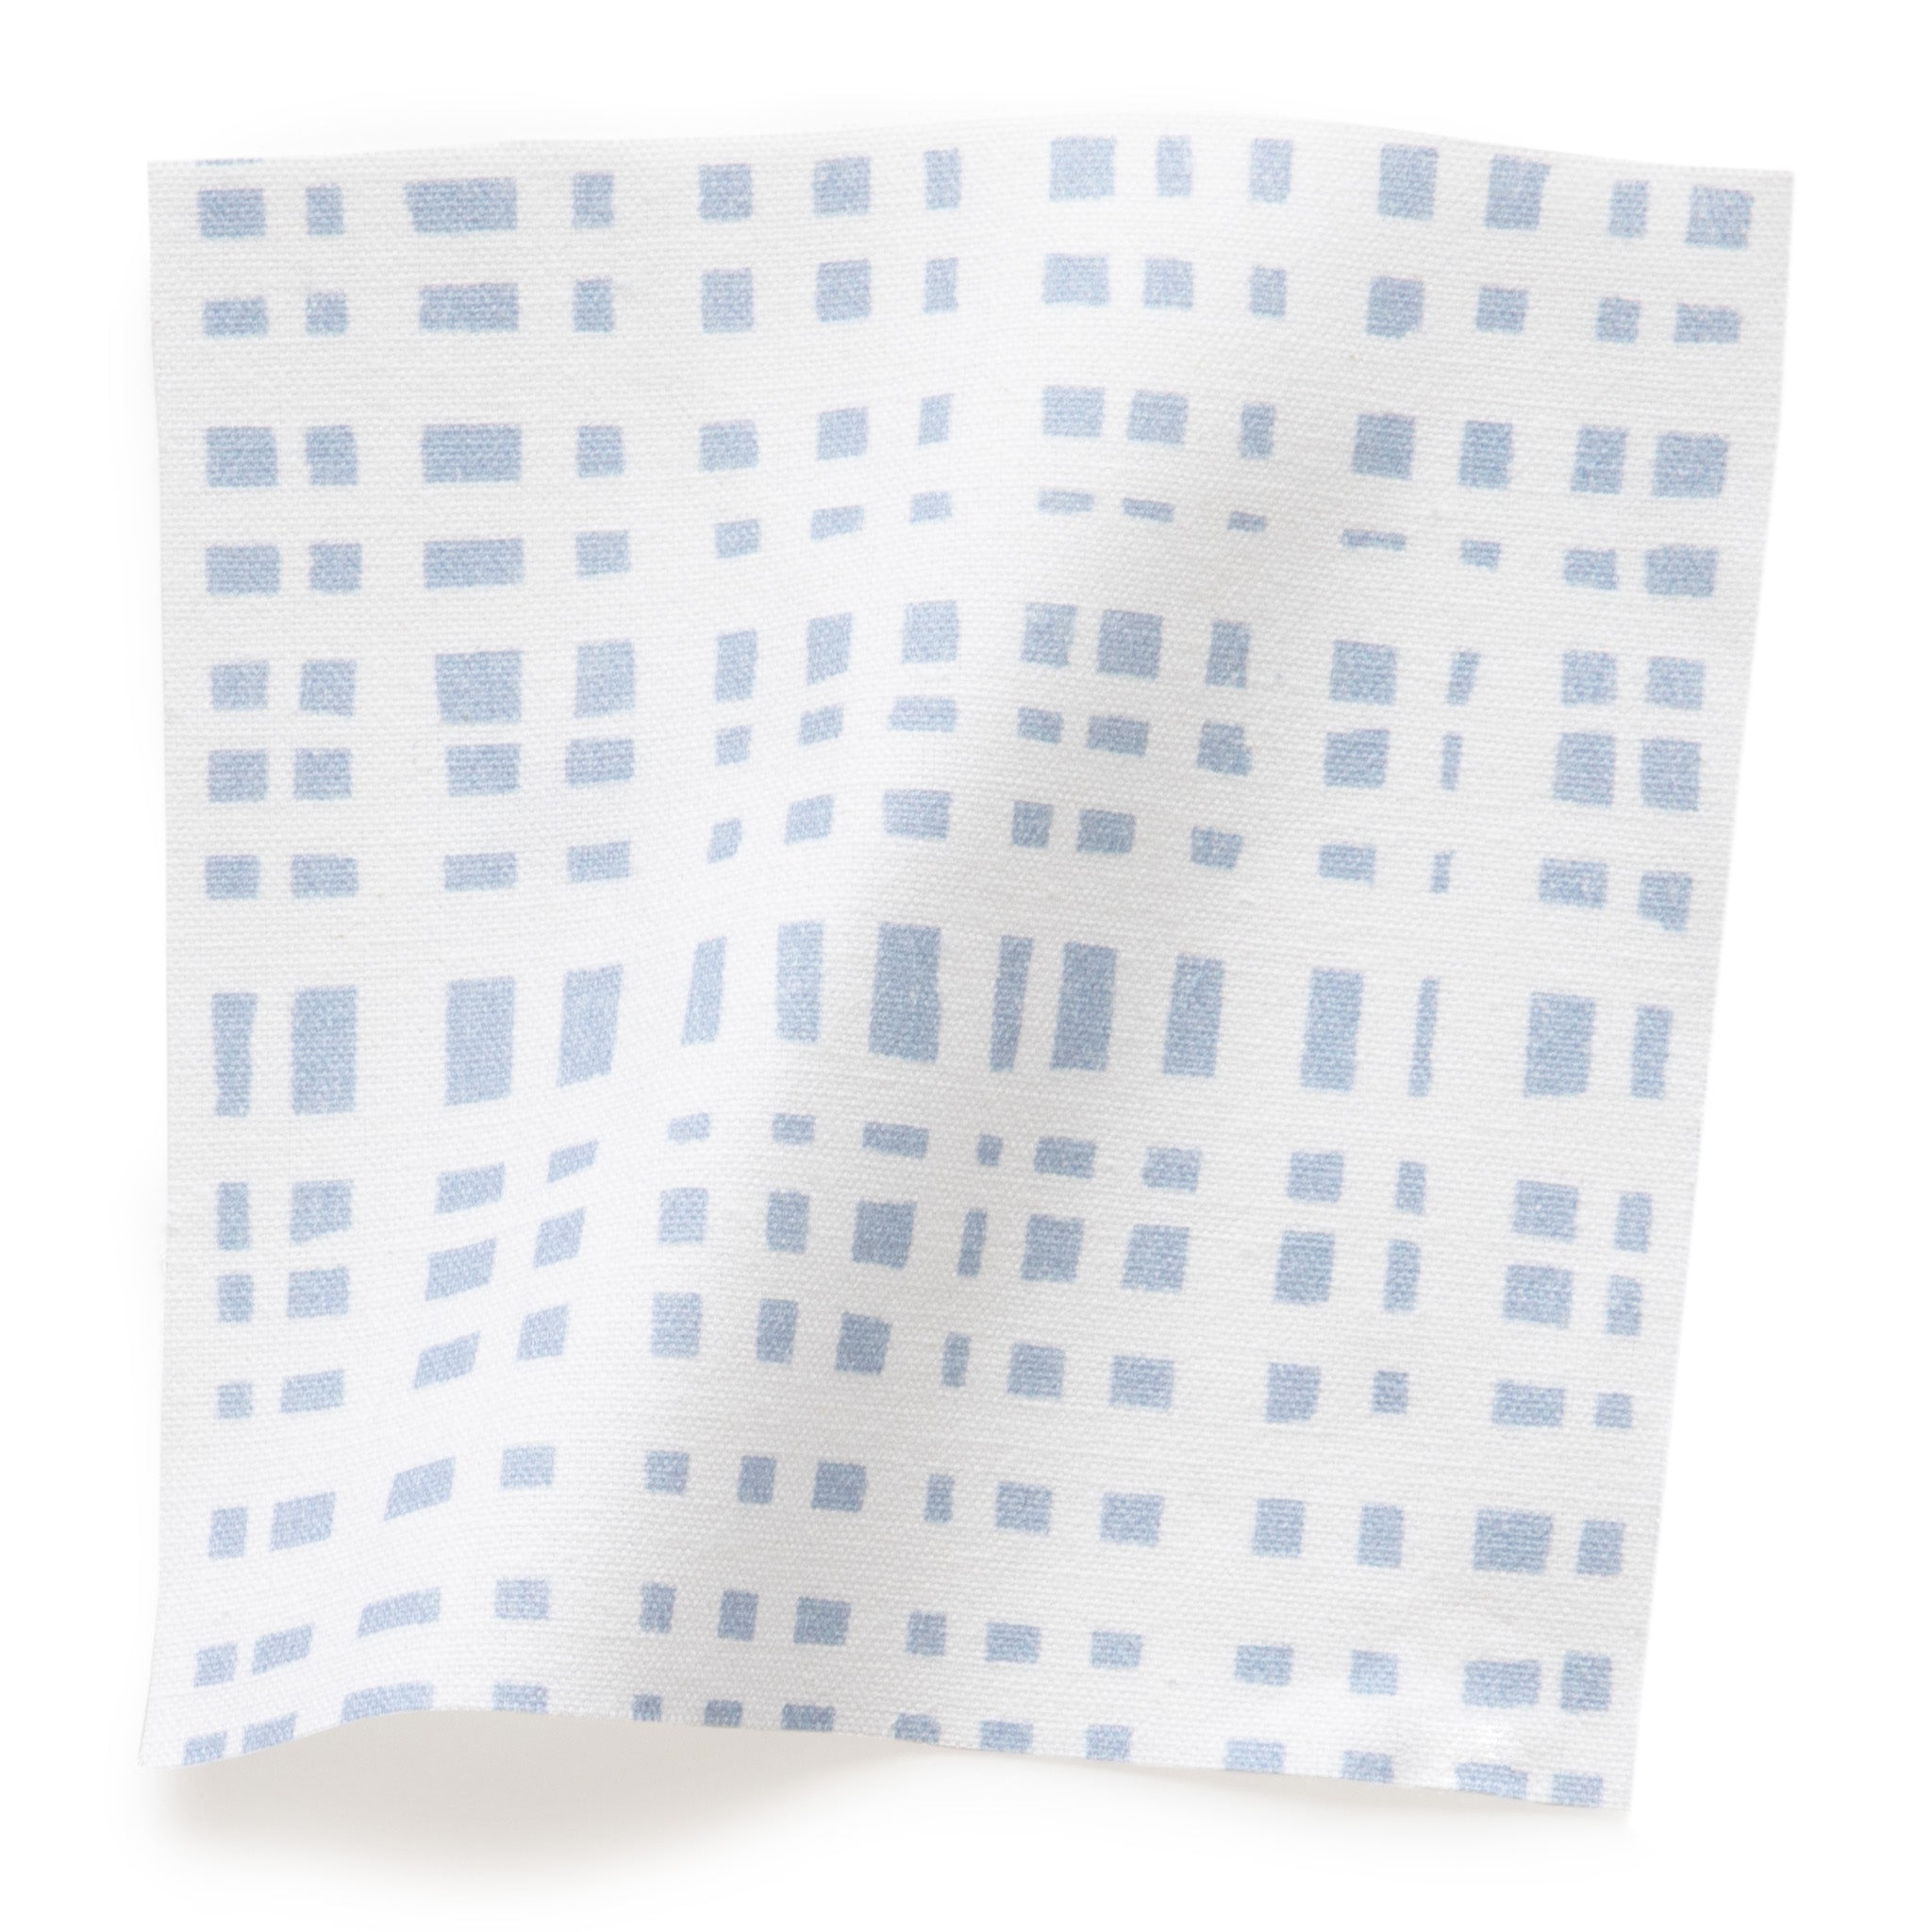 Sky Blue Gingham Printed Cotton Swatch